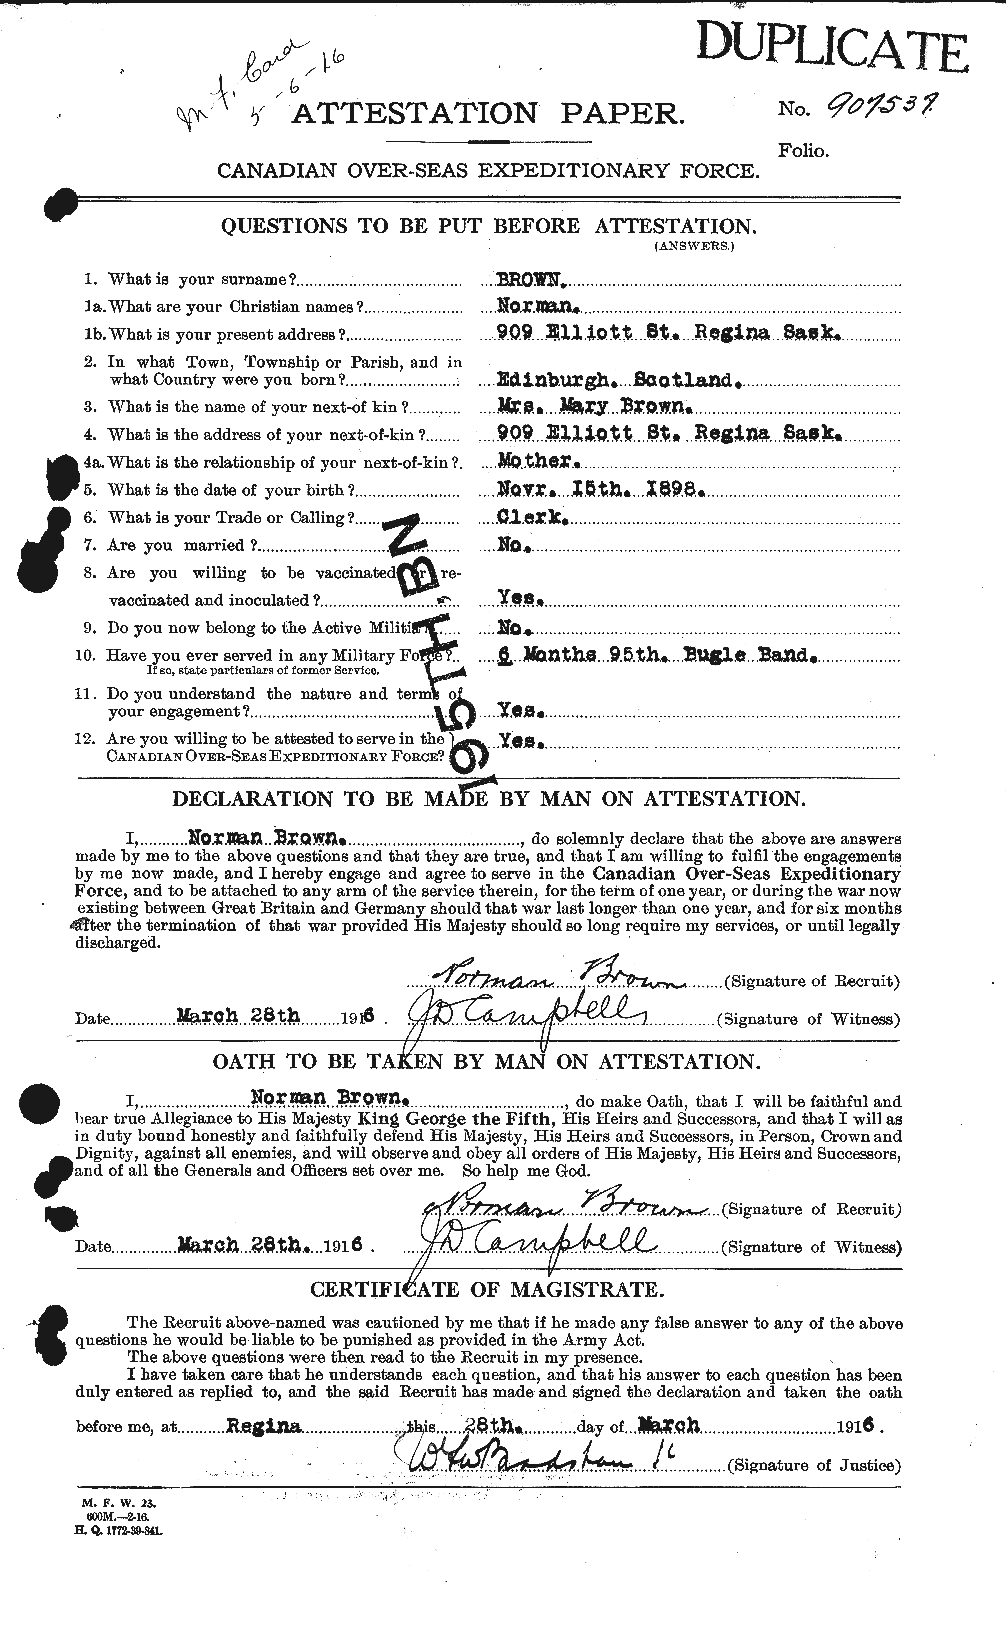 Personnel Records of the First World War - CEF 267100a